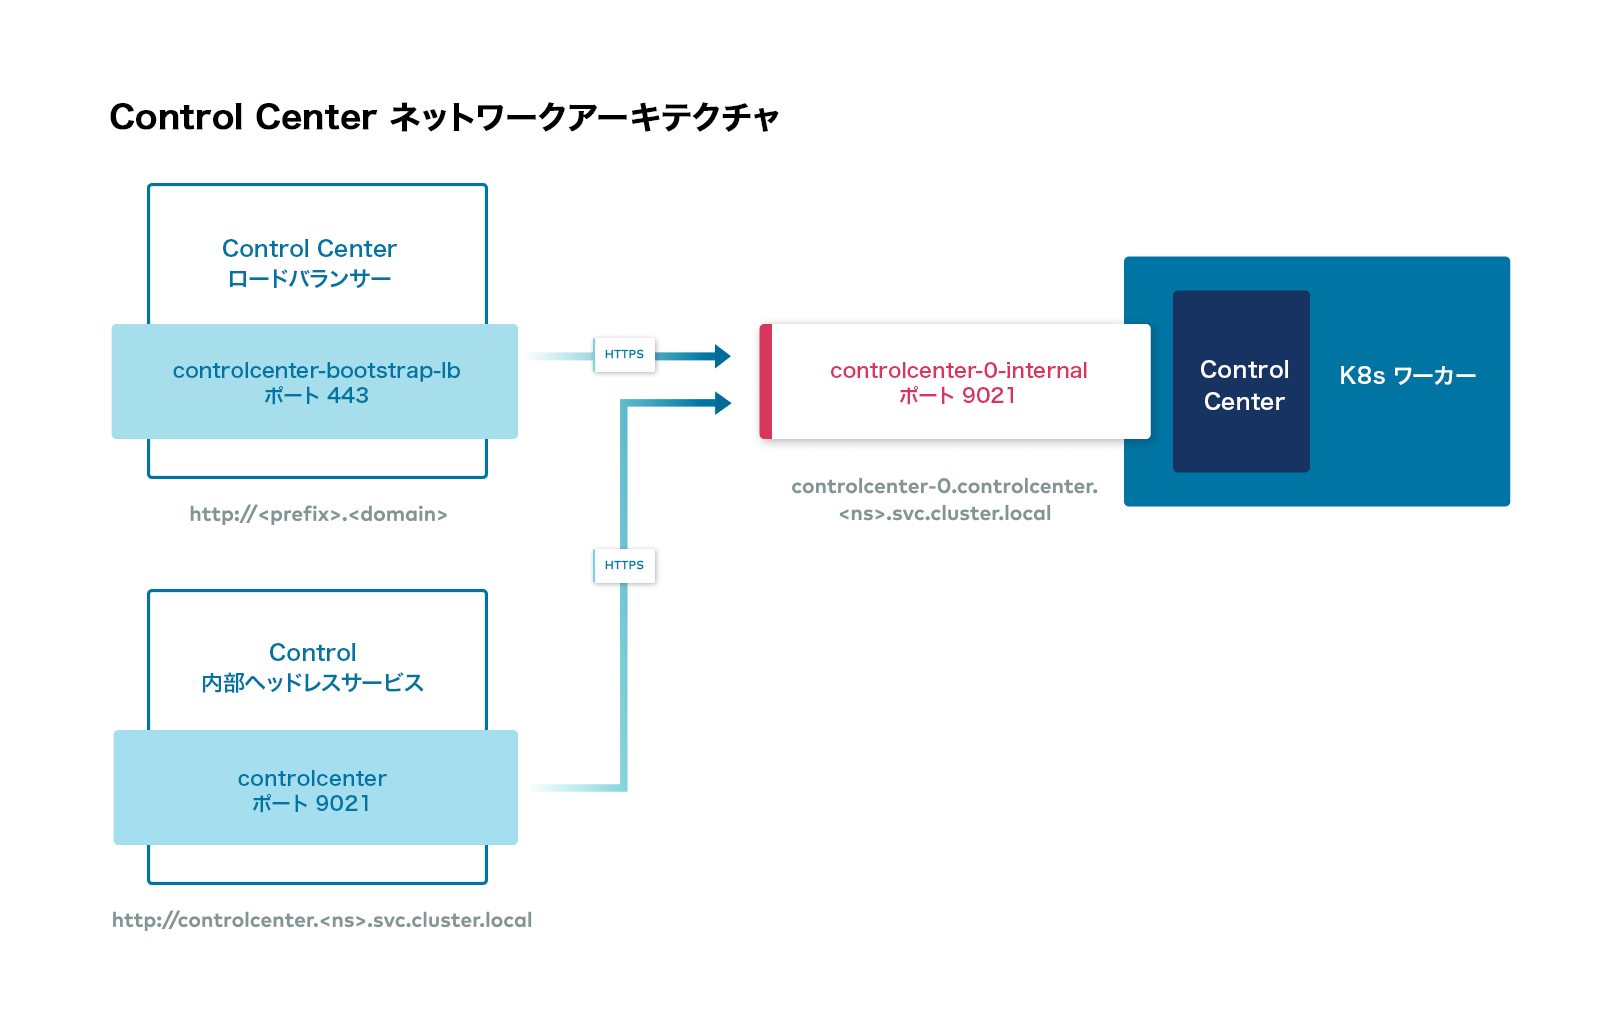 _images/20210428-Control_Center_Networking_Architecture.ja.png